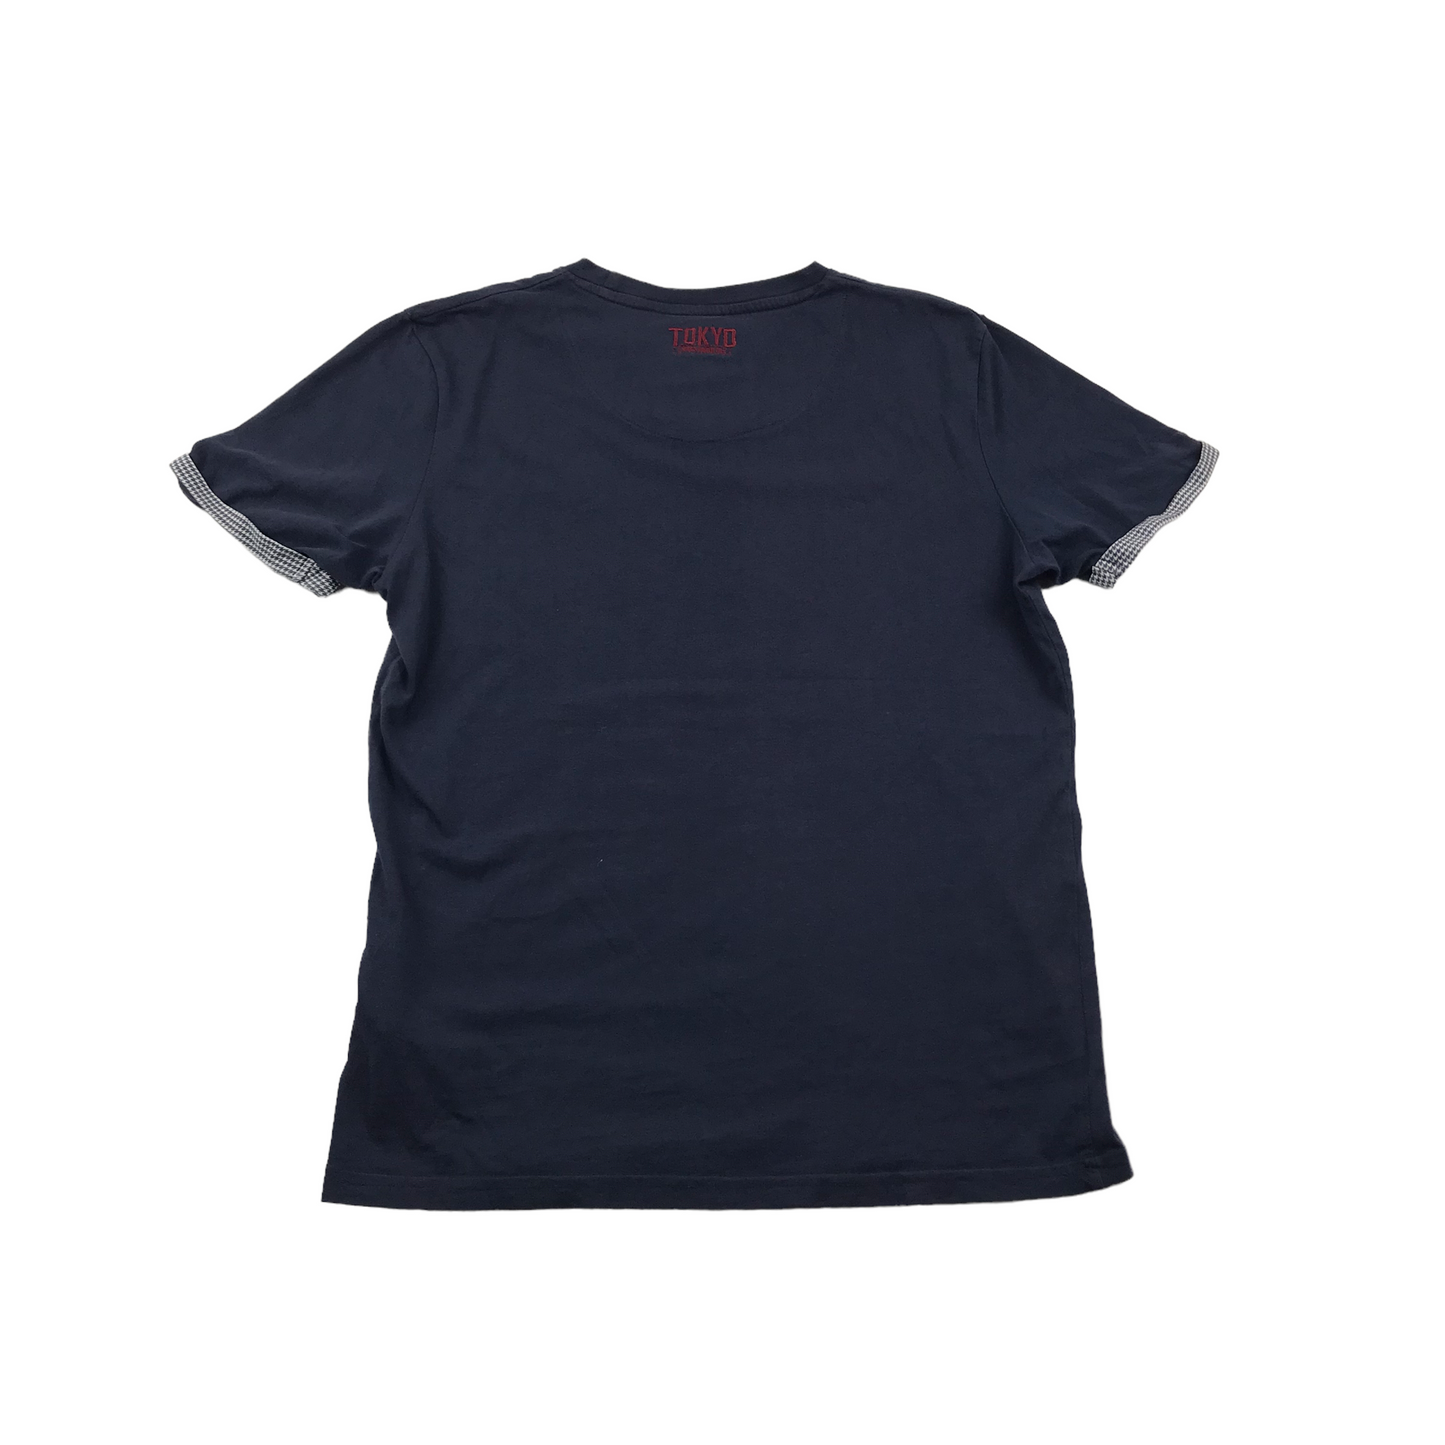 Tokyo Tigers Navy Blue T-shirt with Pocket Adult Size S